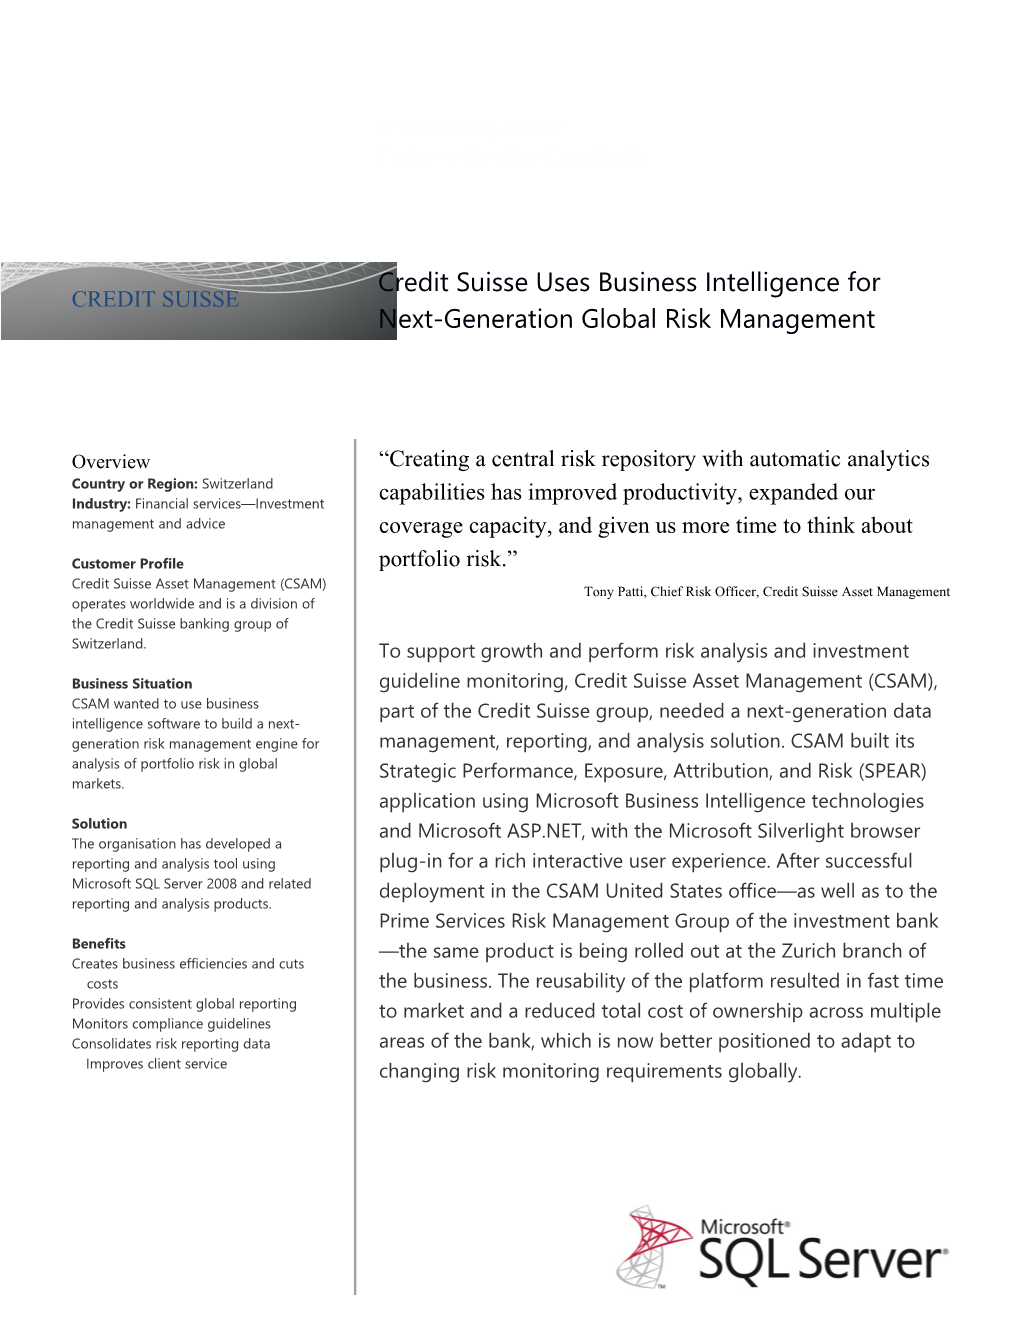 Metia CEP Credit Suisse Uses Business Intelligence for Next-Generation Global Risk Management